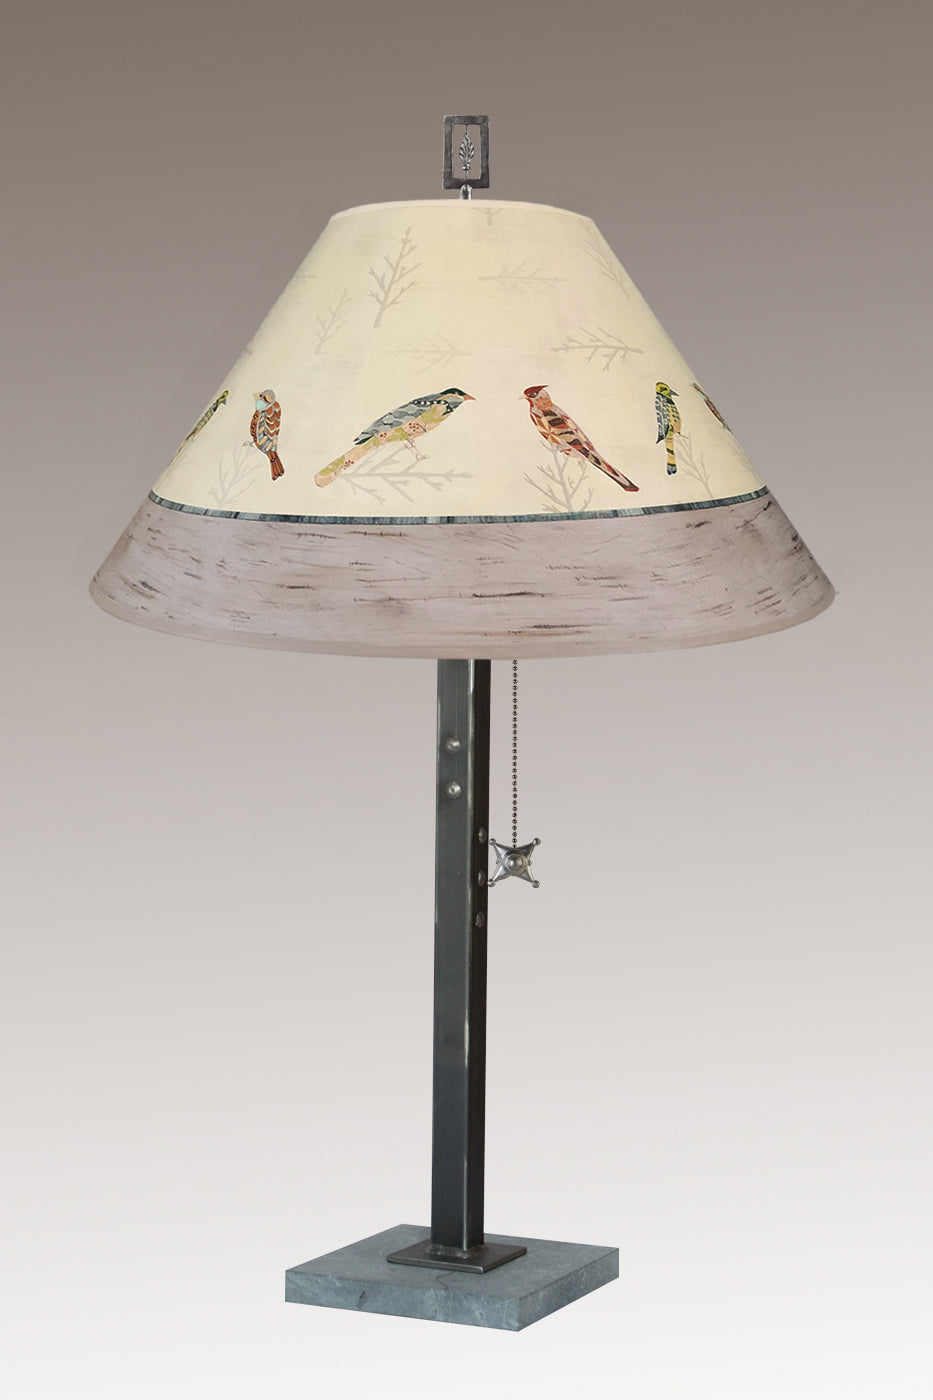 Steel Table Lamp with Large Conical Shade in Bird Friends